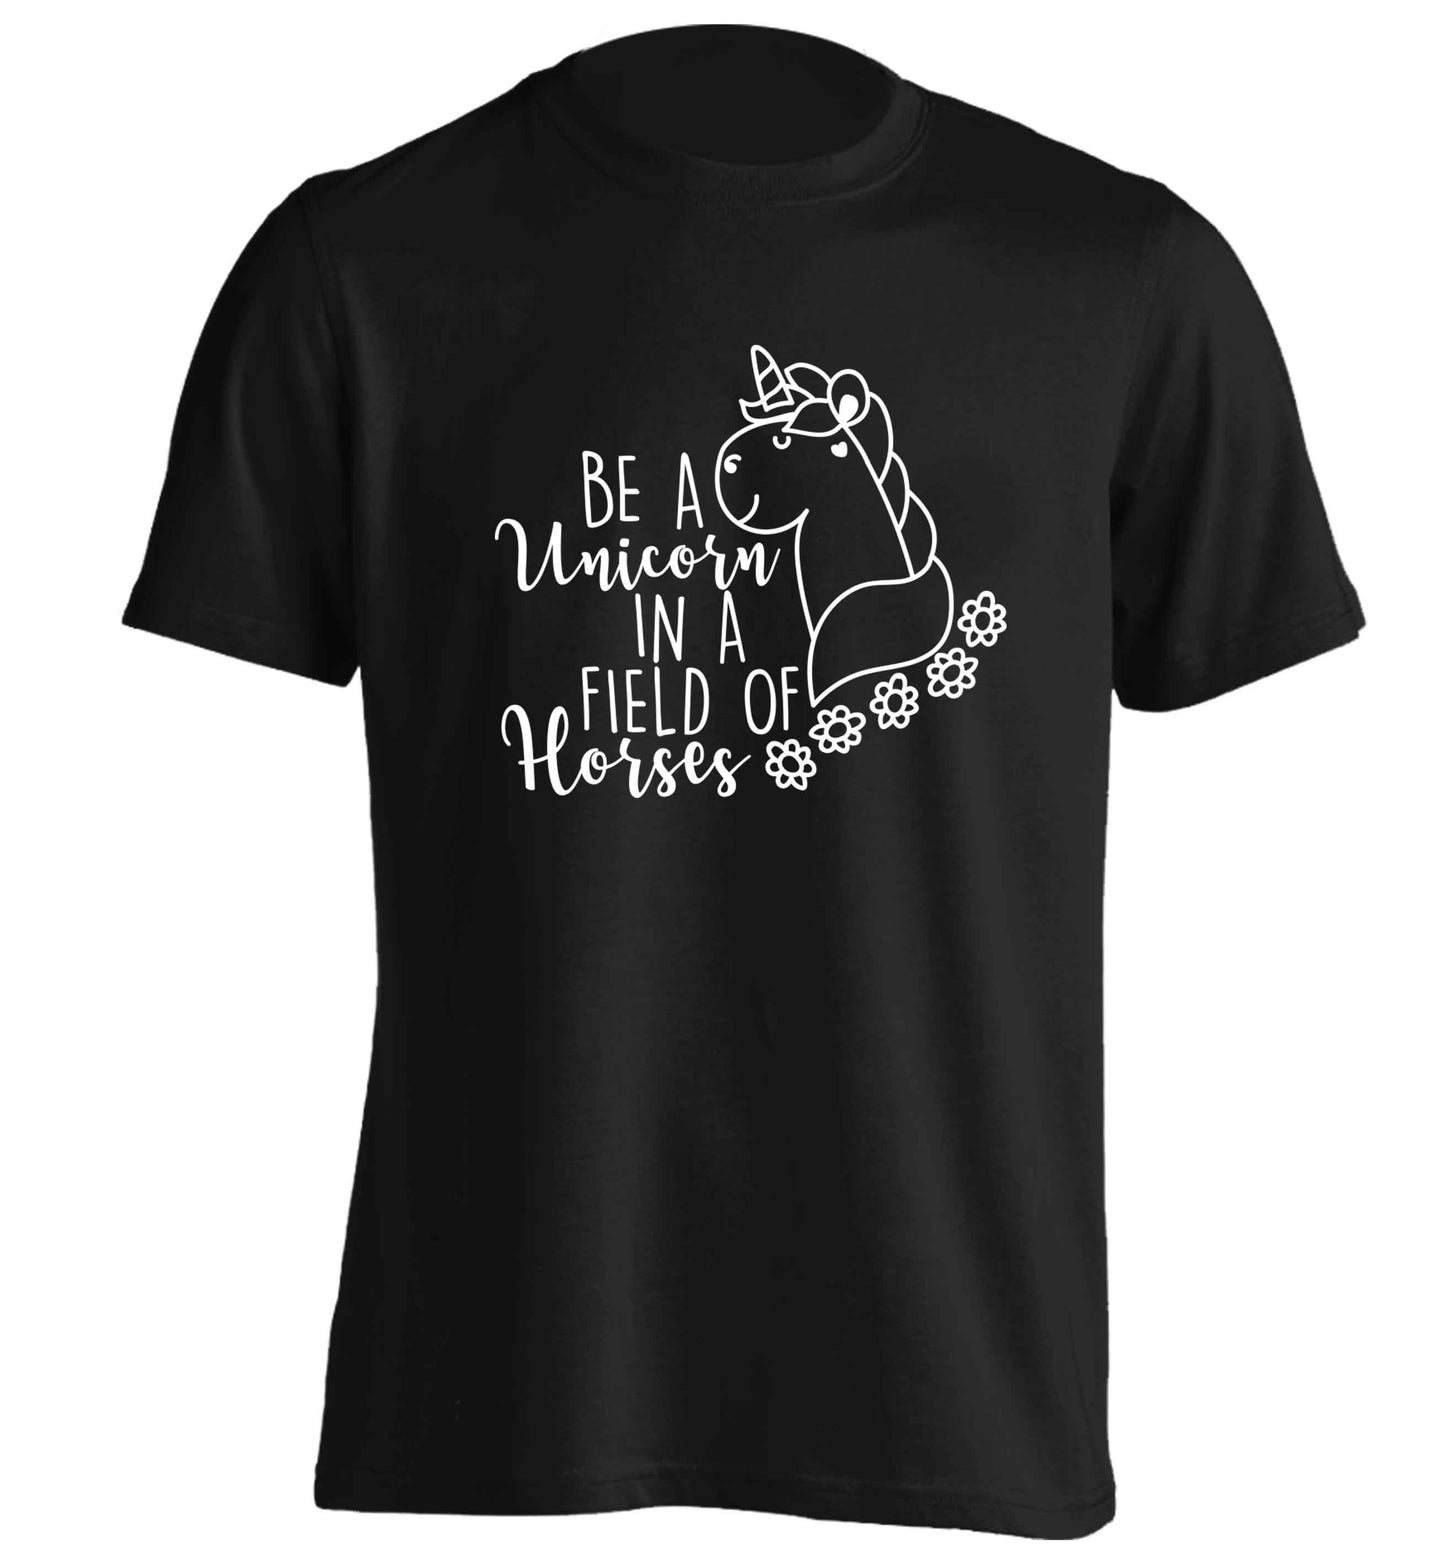 Be a unicorn in a field of horses adults unisex black Tshirt 2XL